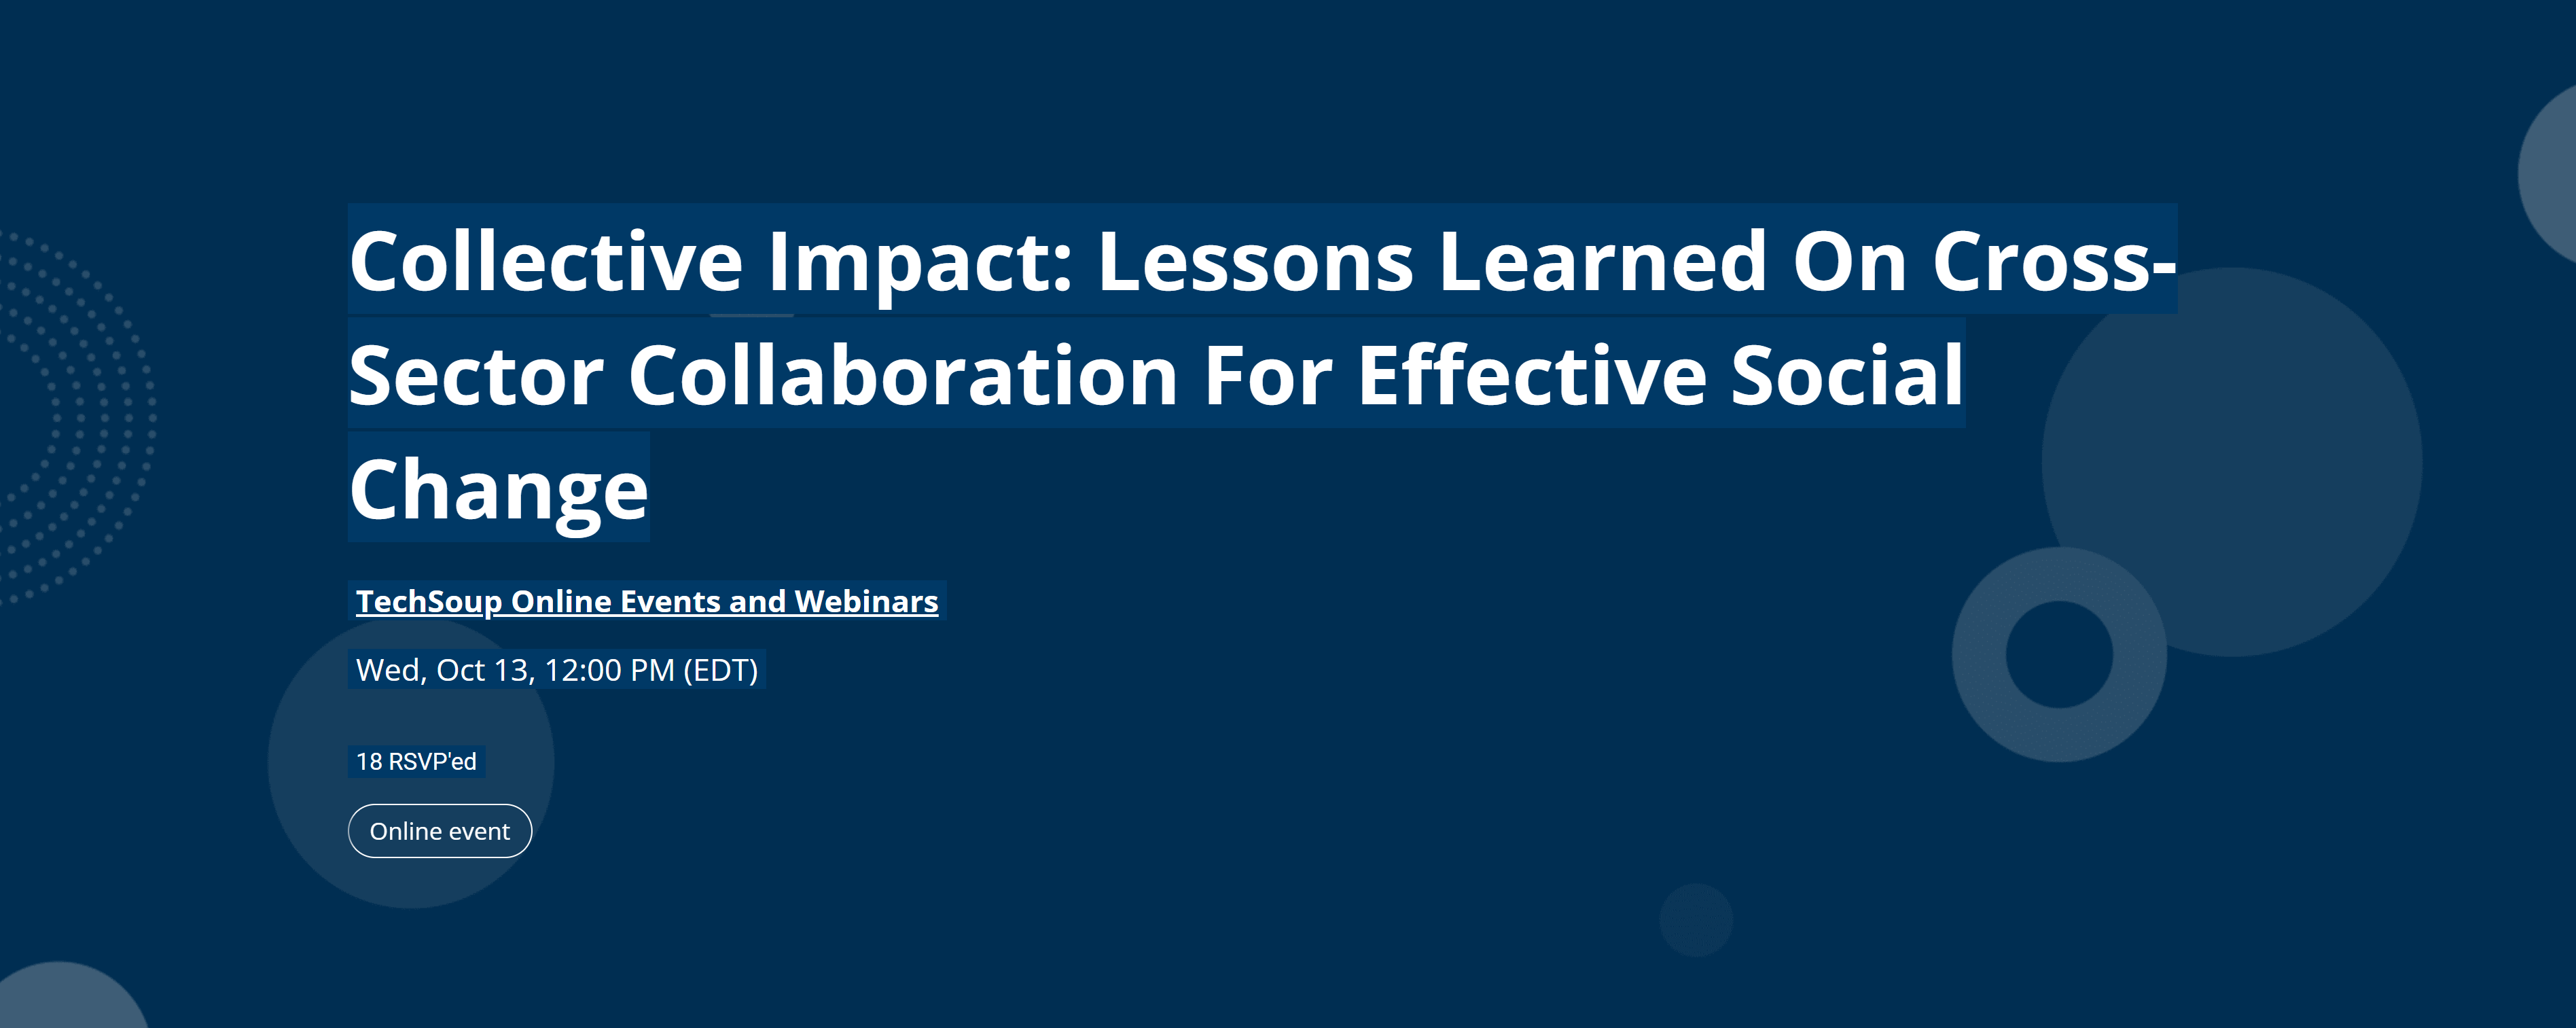 Collective Impact: Lessons Learned On Cross-Sector Collaboration For Effective Social Change